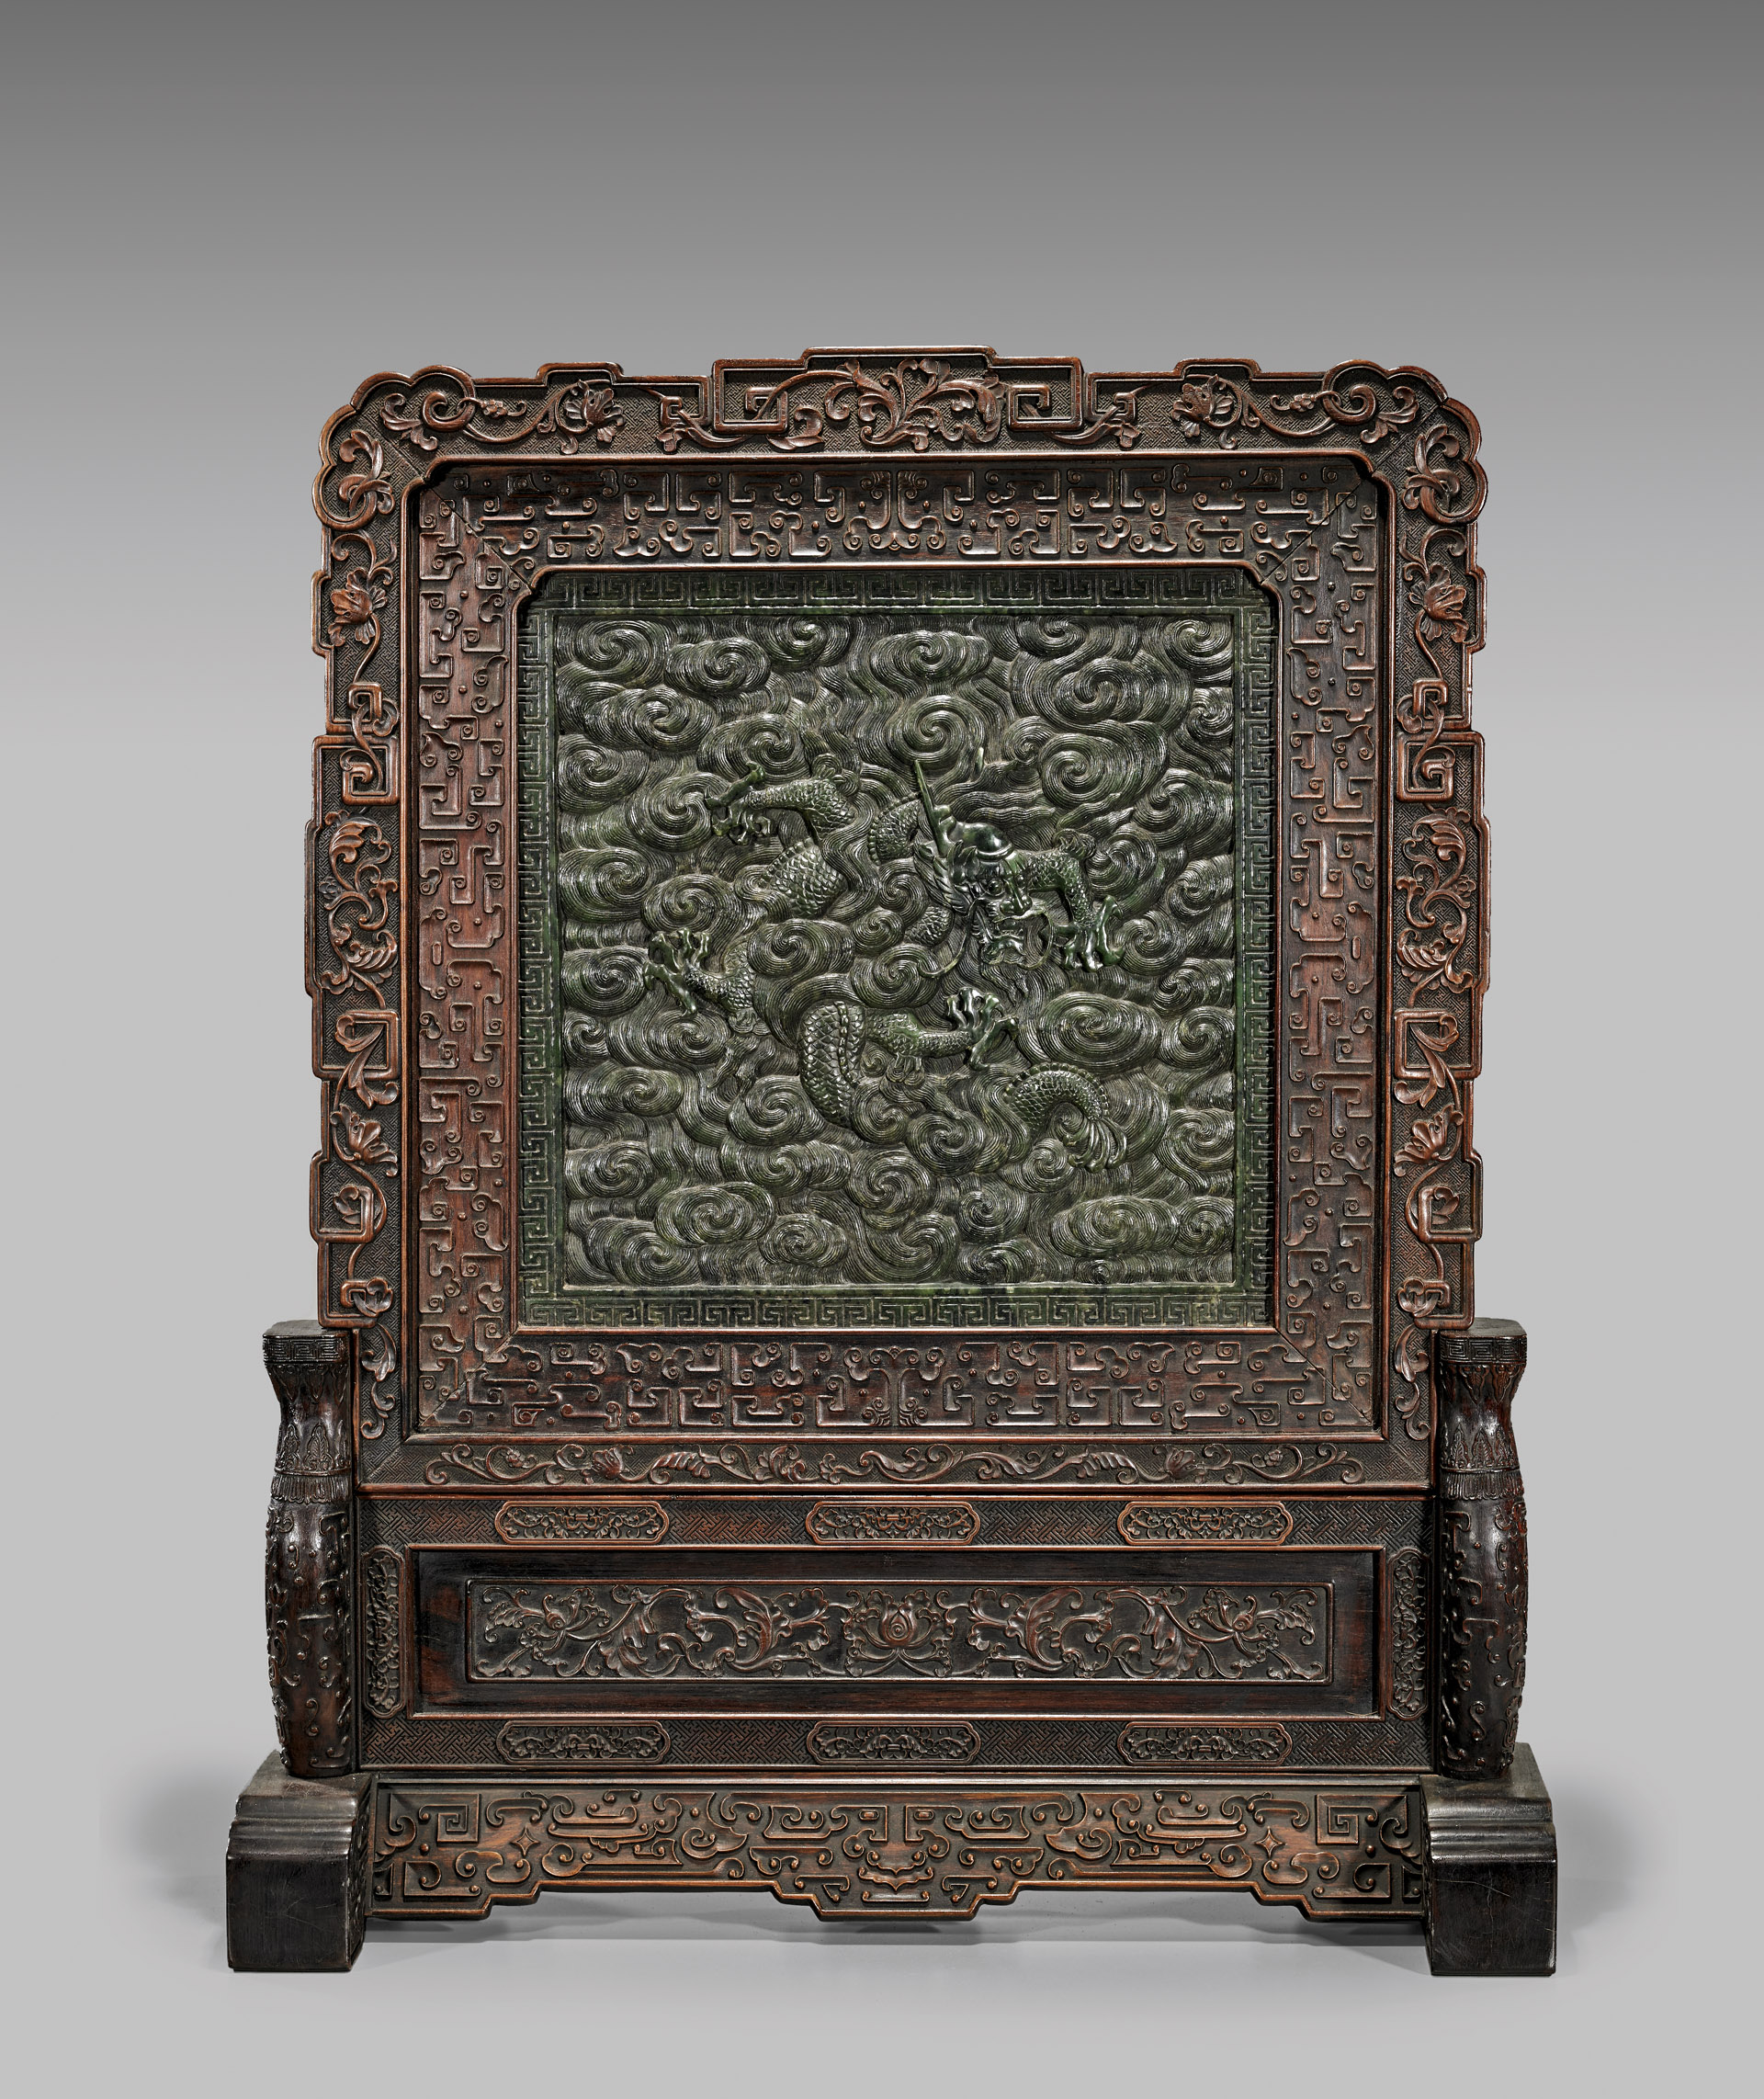 This heavily carved Chinese spinach jade rosewood tablescreen stands 32 inches high. It is estimated at $20,000-$25,000. I.M. Chait Gallery/Auctioneers images